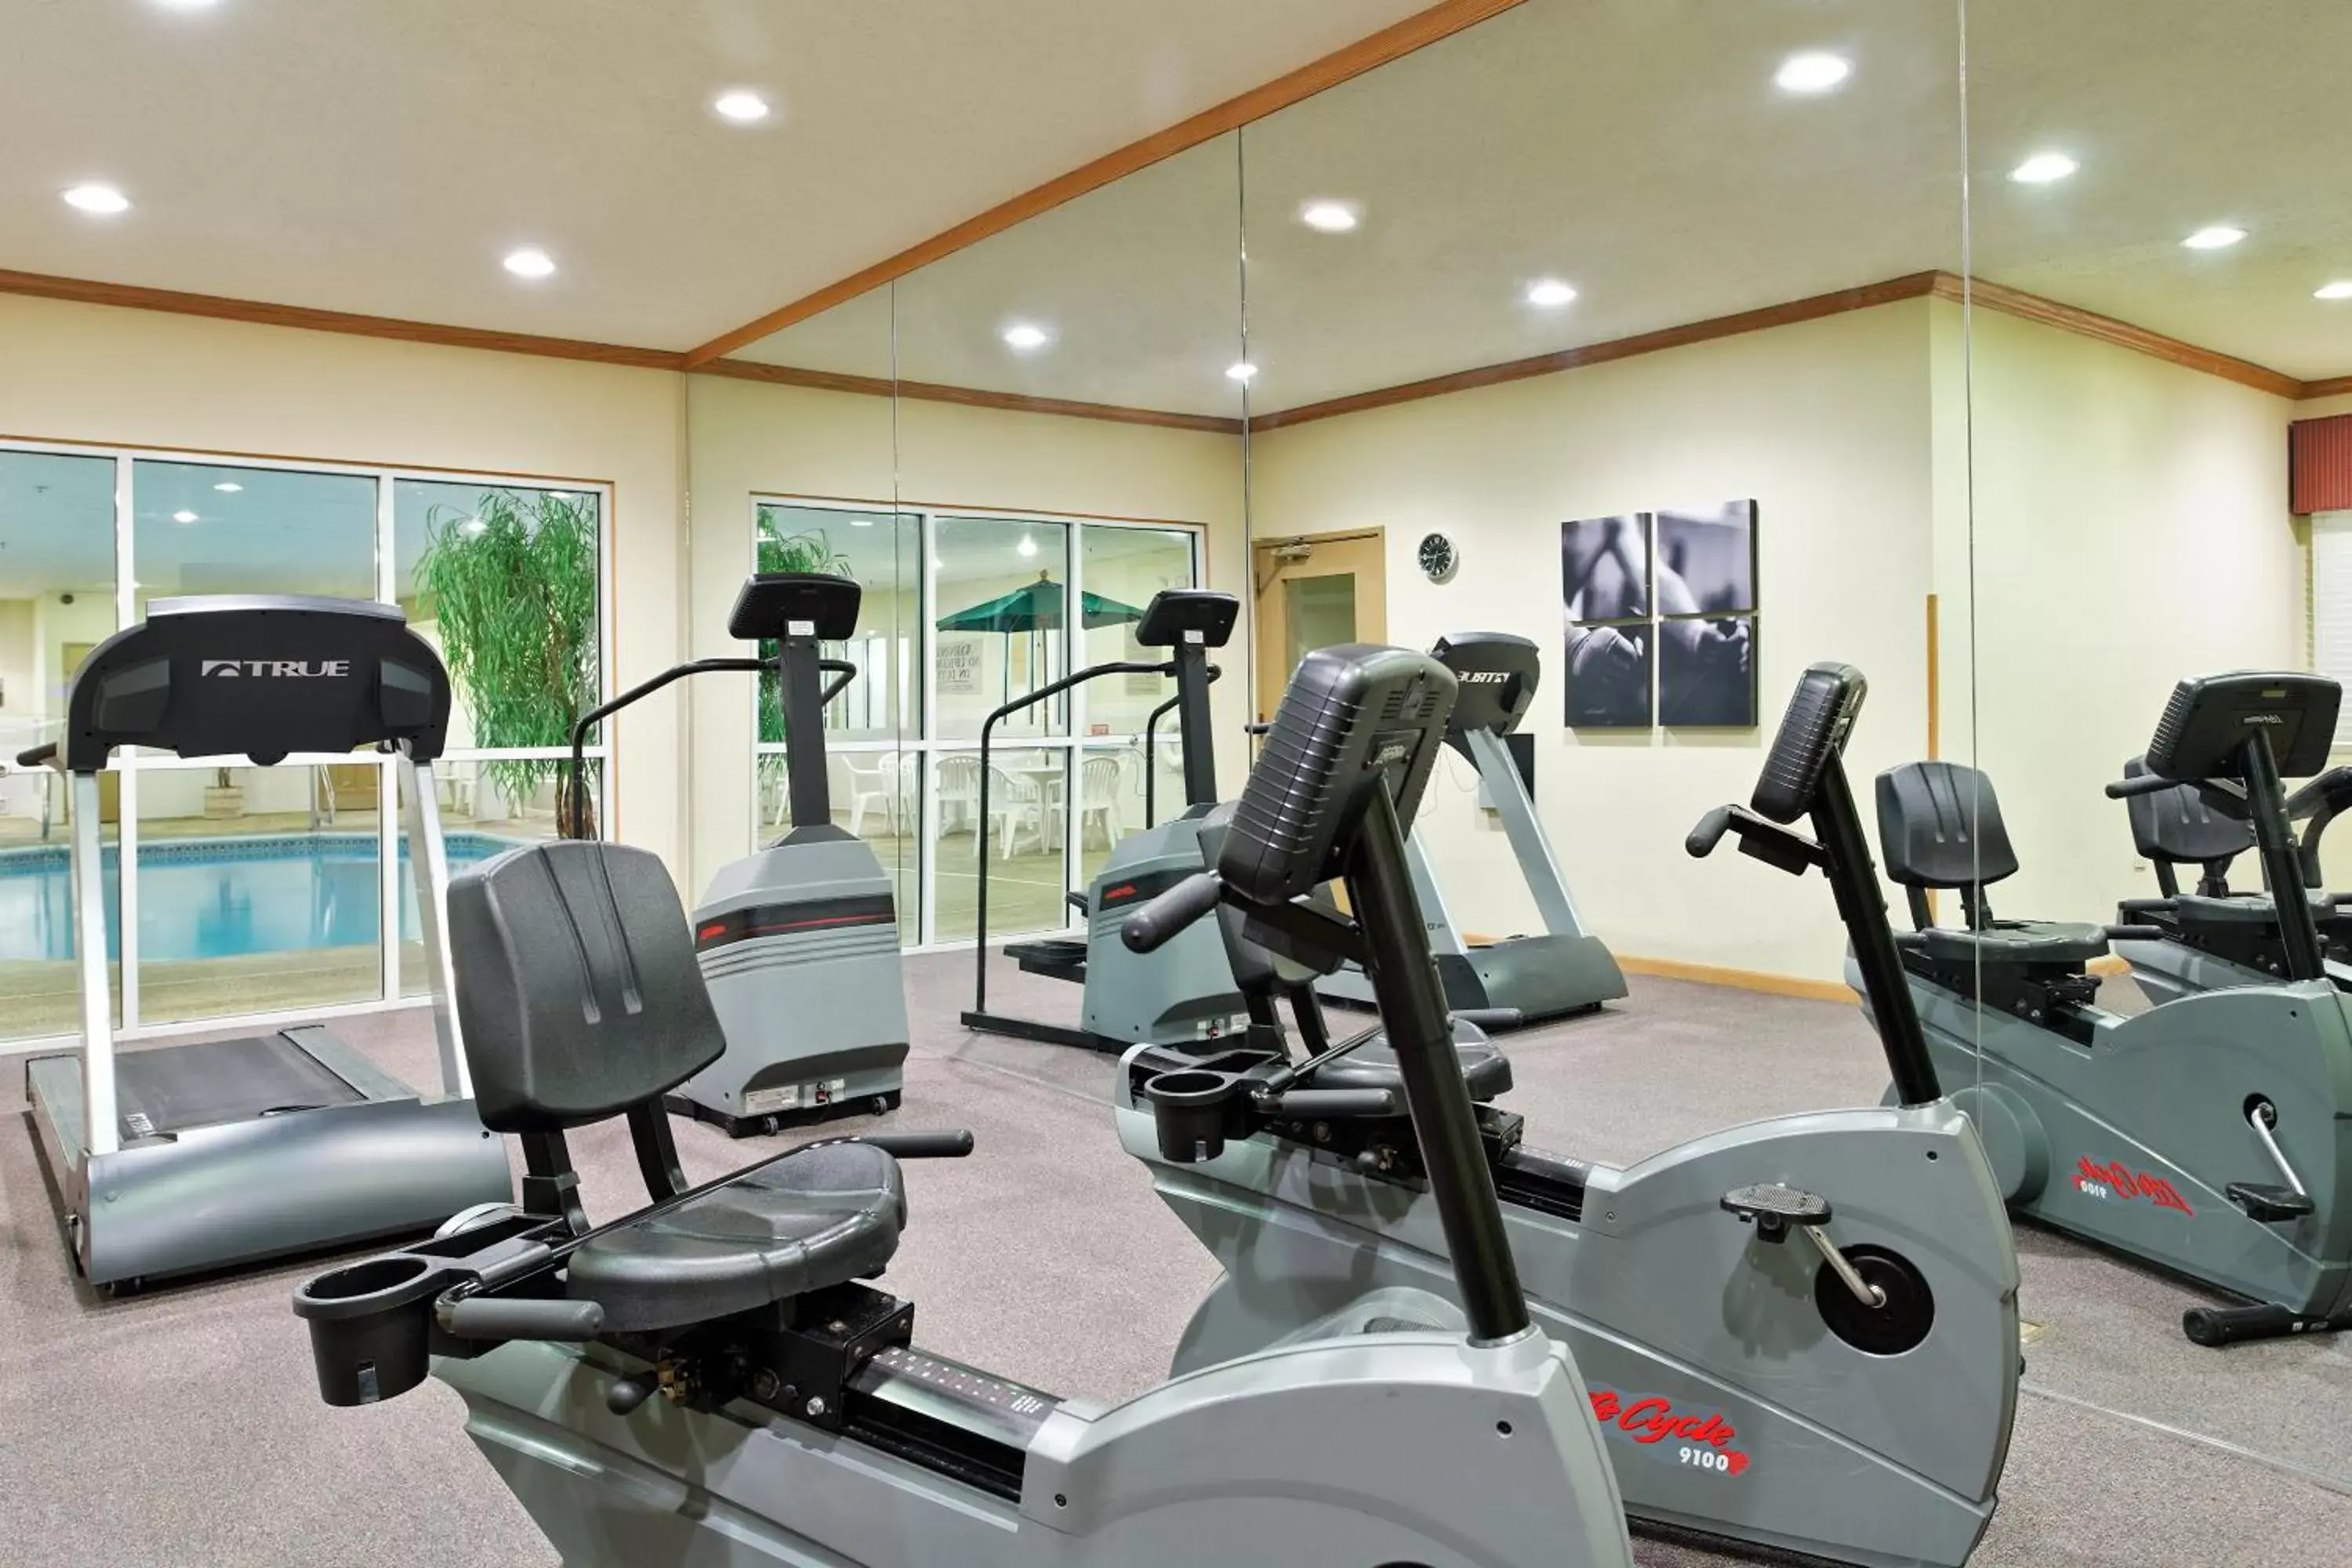 Fitness centre/facilities, Fitness Center/Facilities in Country Inn & Suites by Radisson, Rock Falls, IL